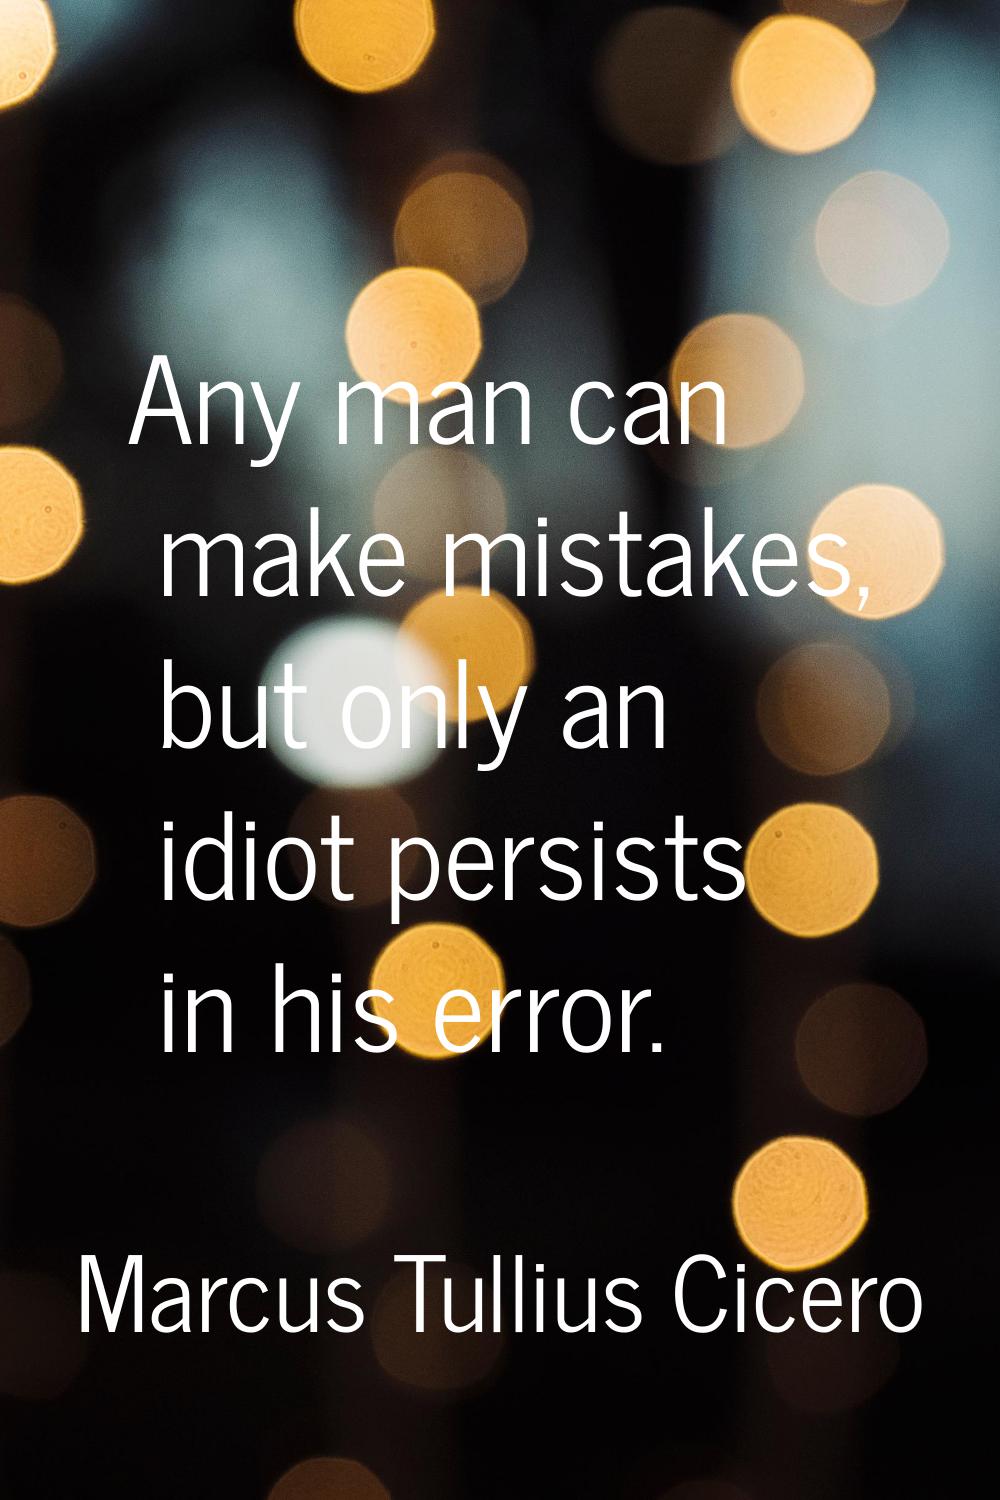 Any man can make mistakes, but only an idiot persists in his error.